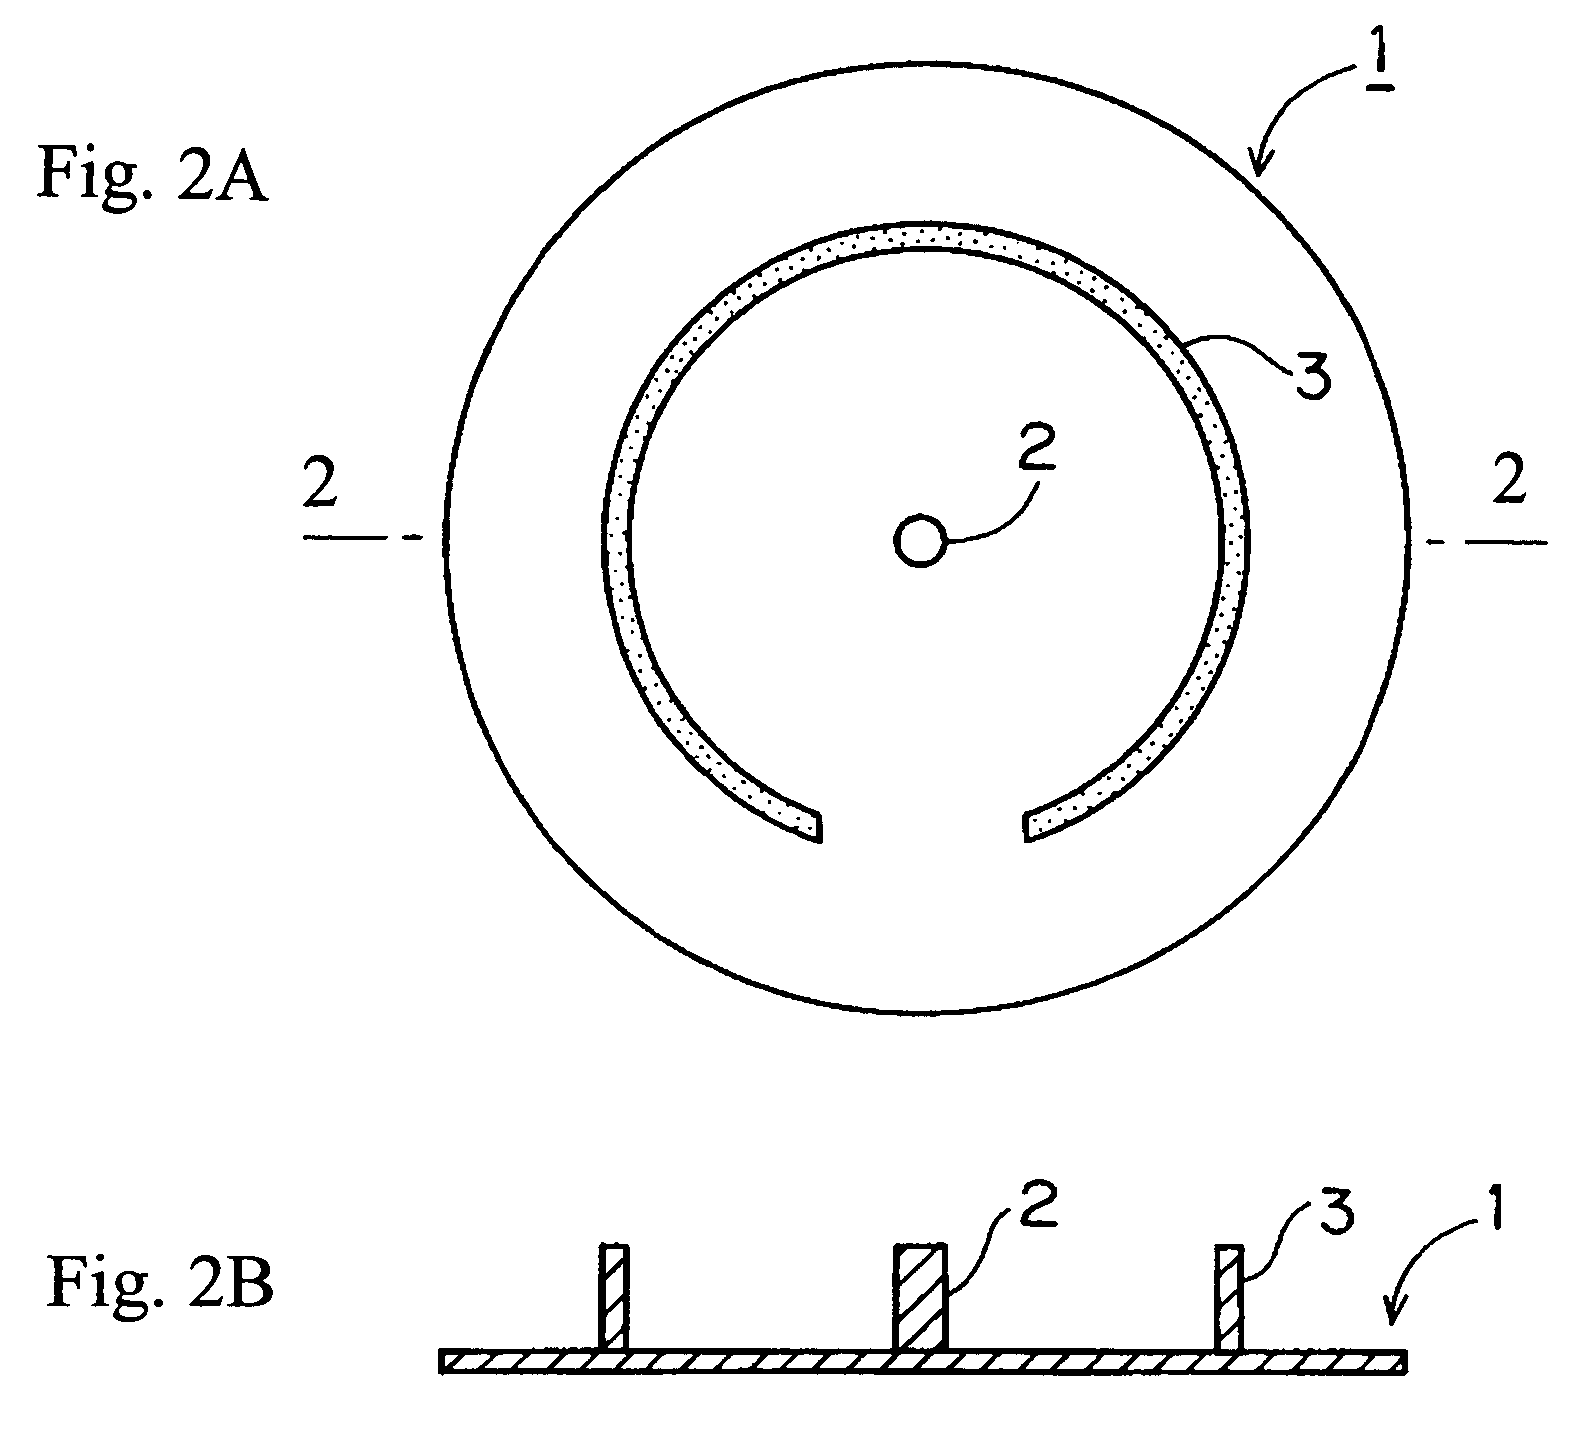 Heat treatment jig for semiconductor silicon substrate